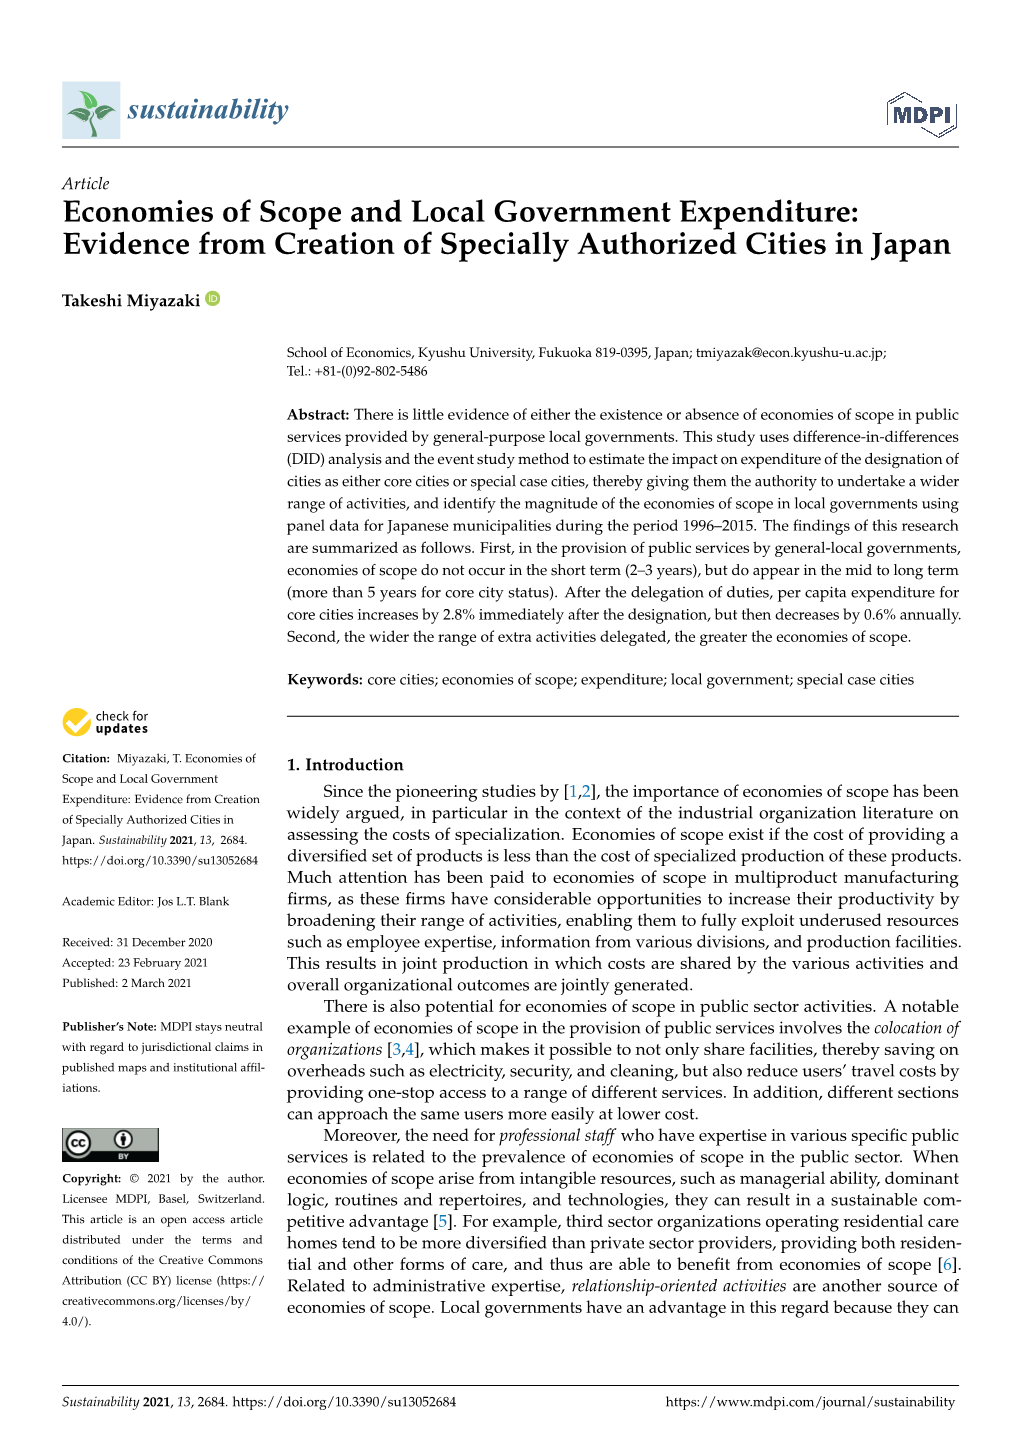 Economies of Scope and Local Government Expenditure: Evidence from Creation of Specially Authorized Cities in Japan